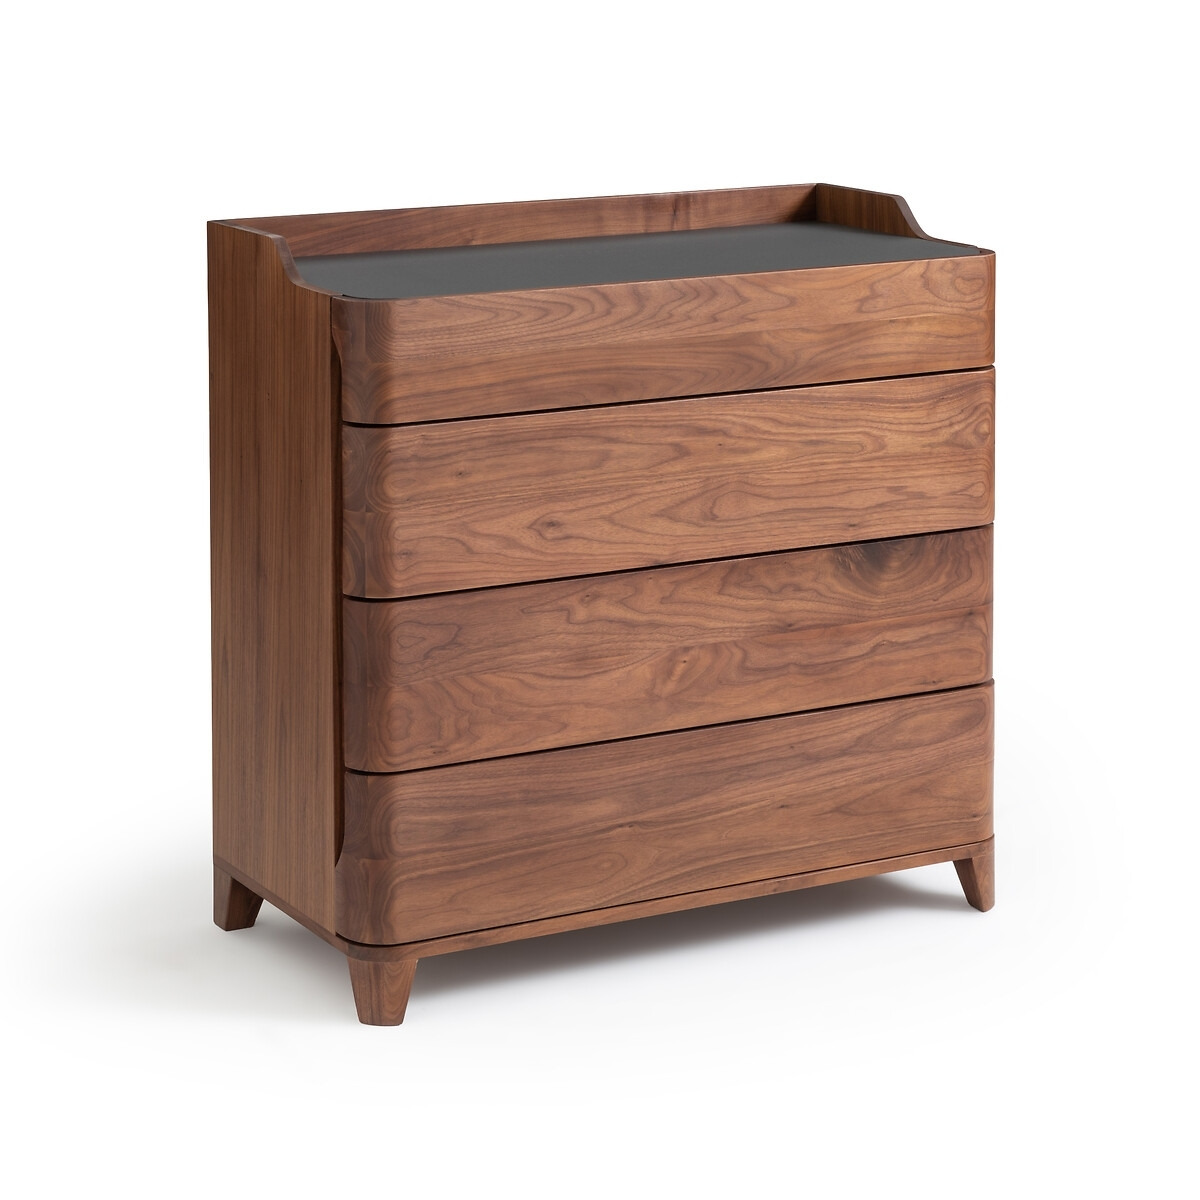 Junius Solid Walnut & Linoleum Chest of Drawers by E. Gallina - image 1